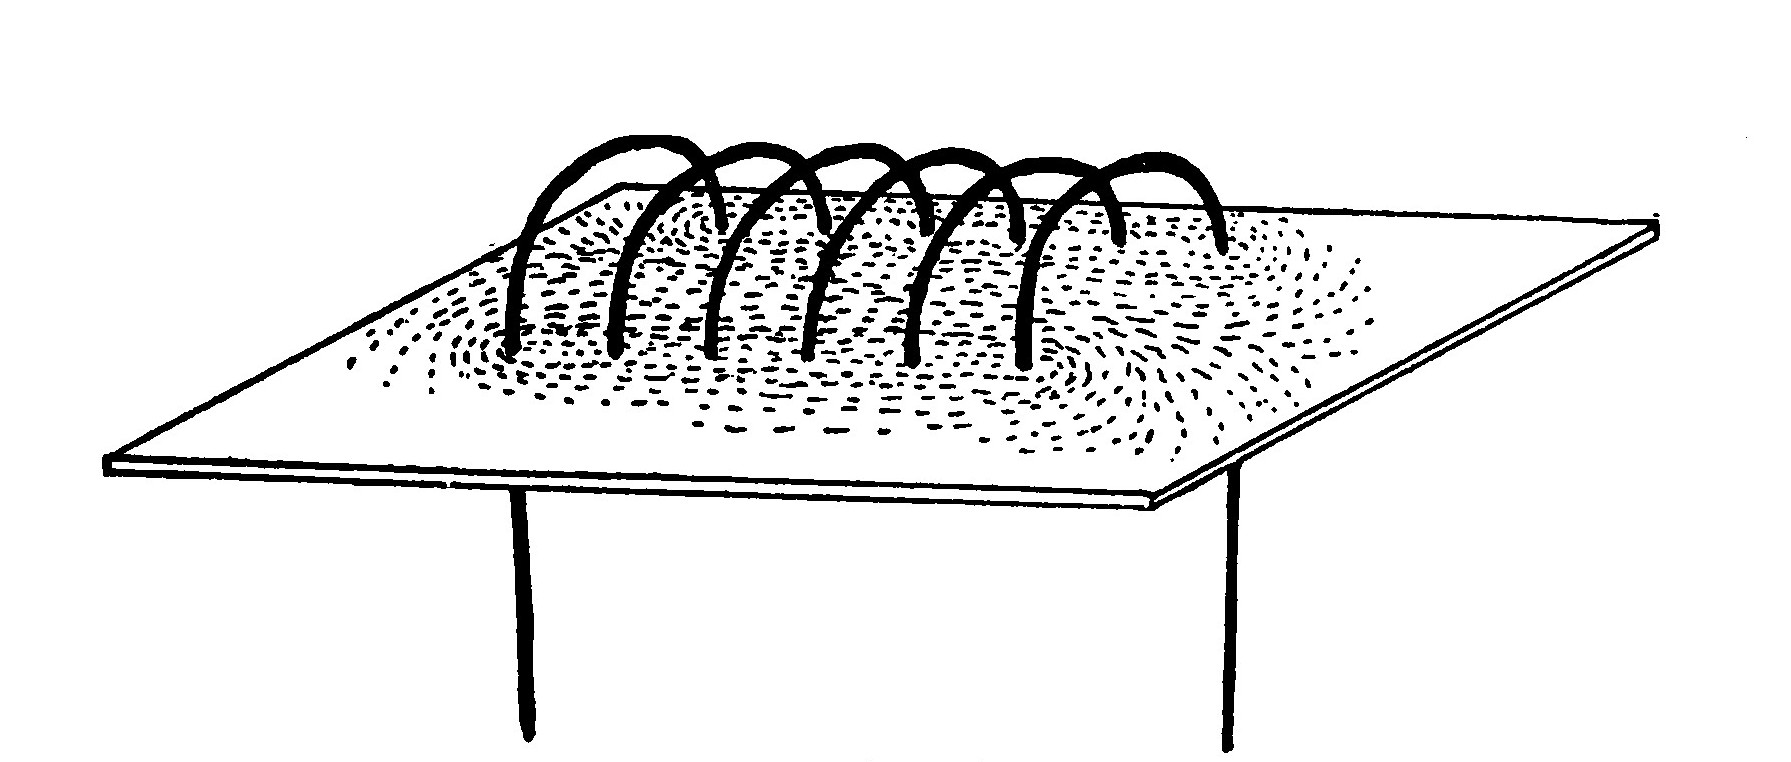 FIG. 15. Magnetic Phantom about a Coil of Wire.